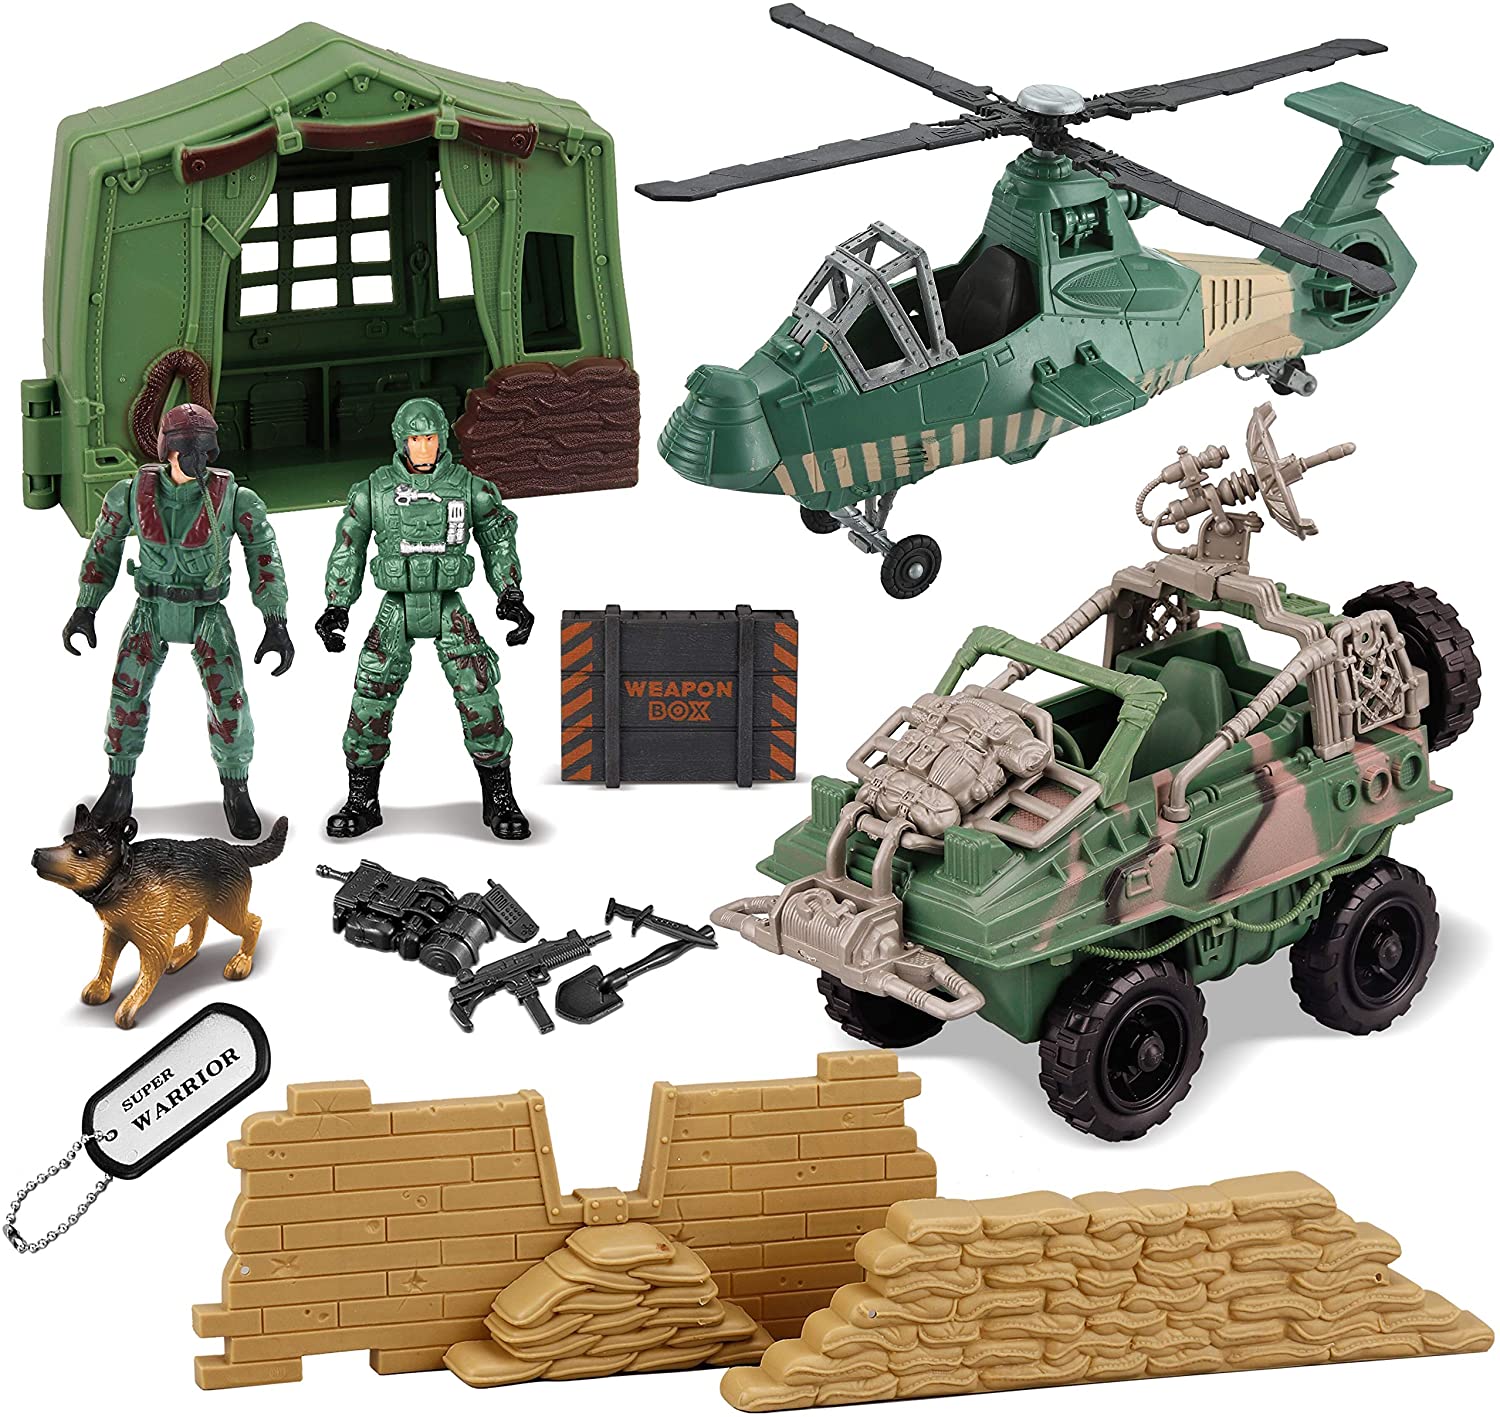 Gold Toy Pcs Military Toys Army Men Action Figures Play Set With